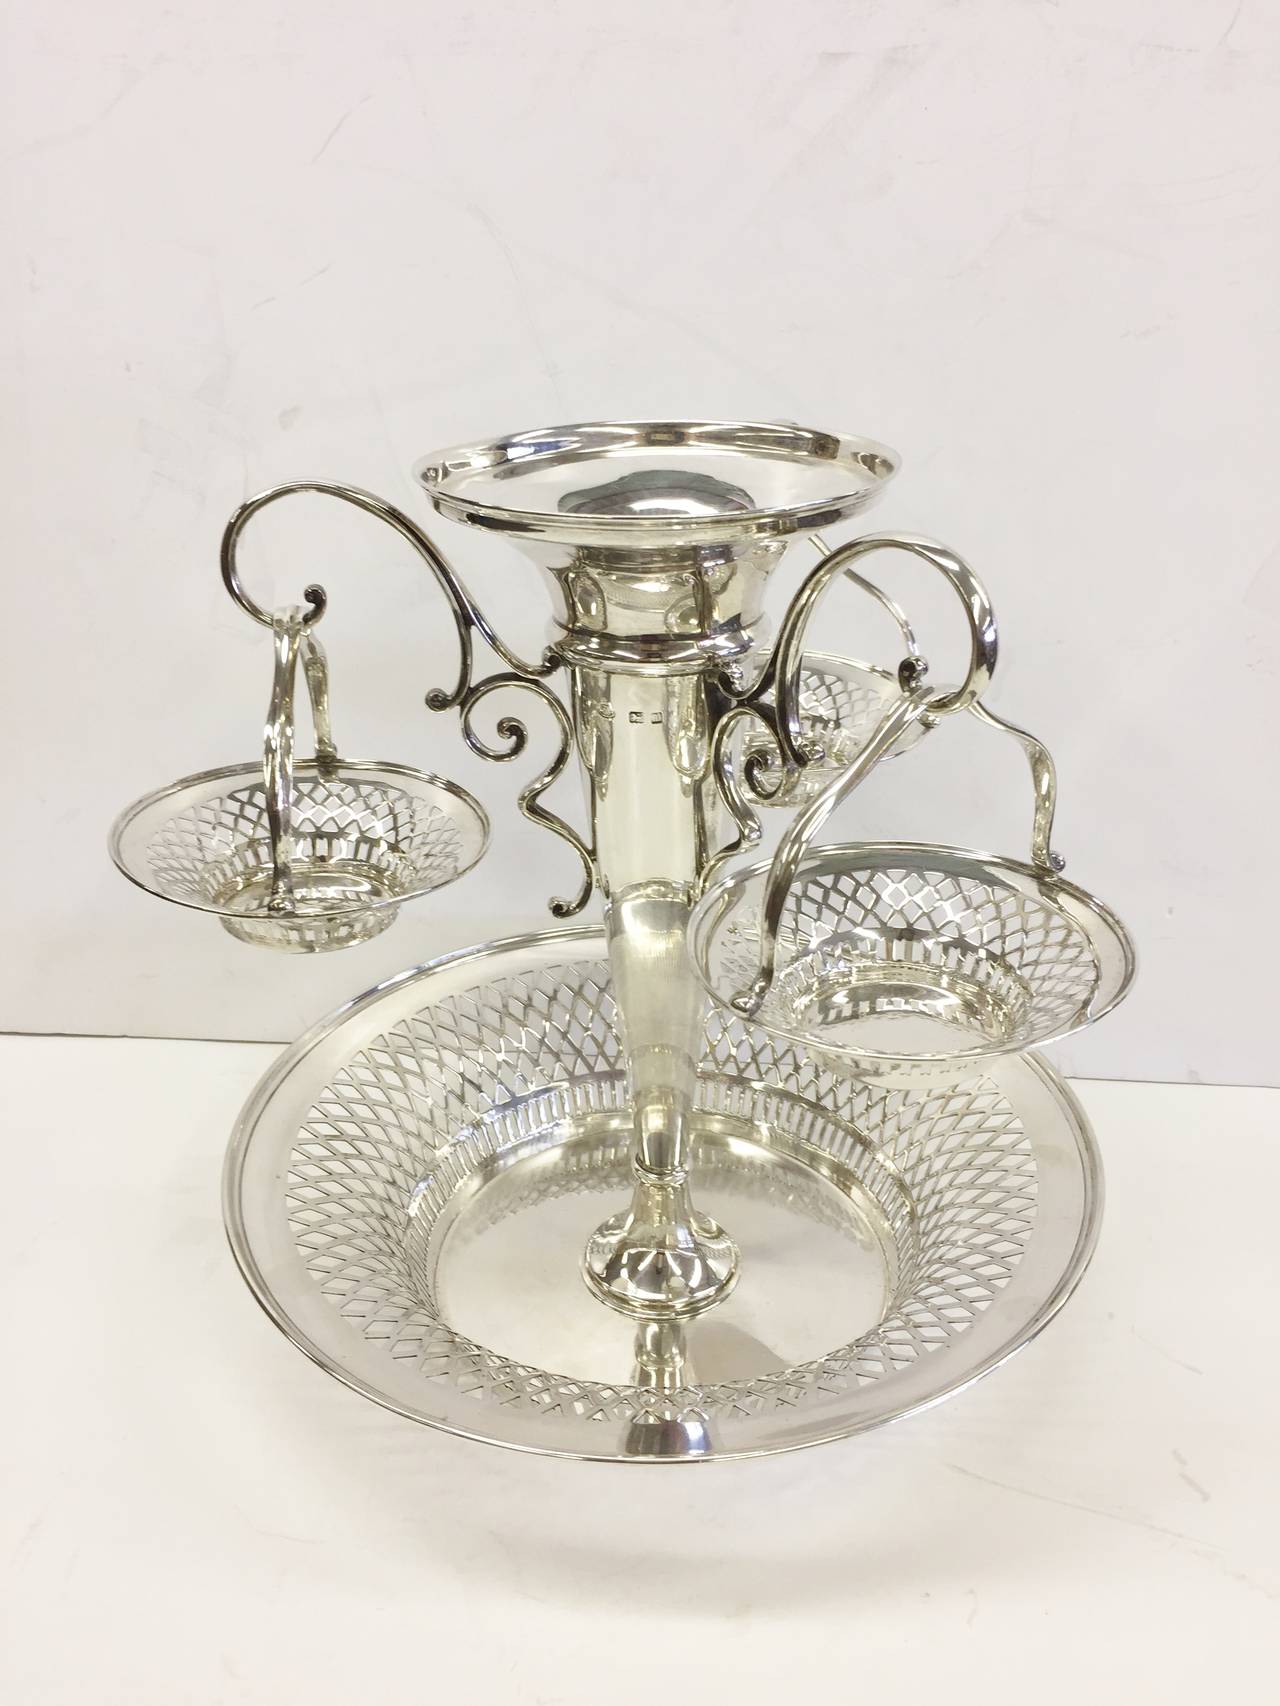 A fine dining table decoration in sterling silver. This epergne has three pierced hanging baskets and a removable pierced top bowl. The maker is the famous designer/silversmith Hukin and Heath. It was assayed in Birmingham, England in 1908.